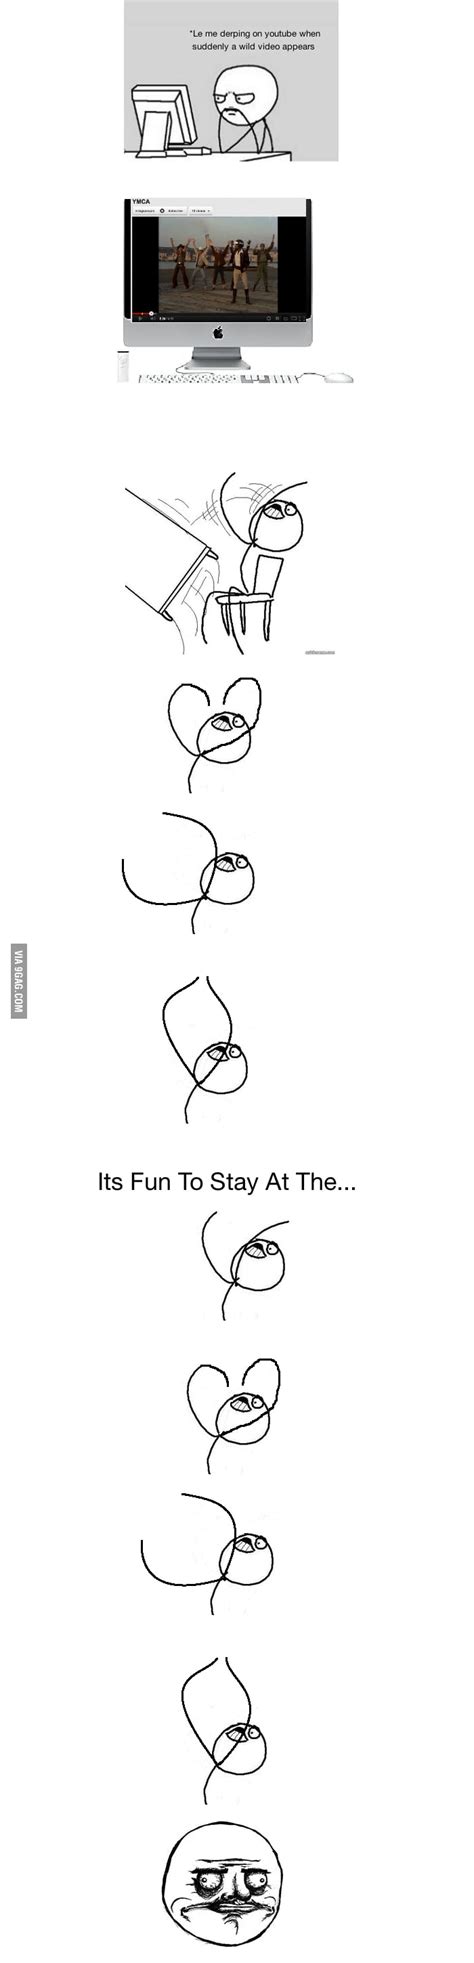 Its Fun To Stay At The Ymca 9gag